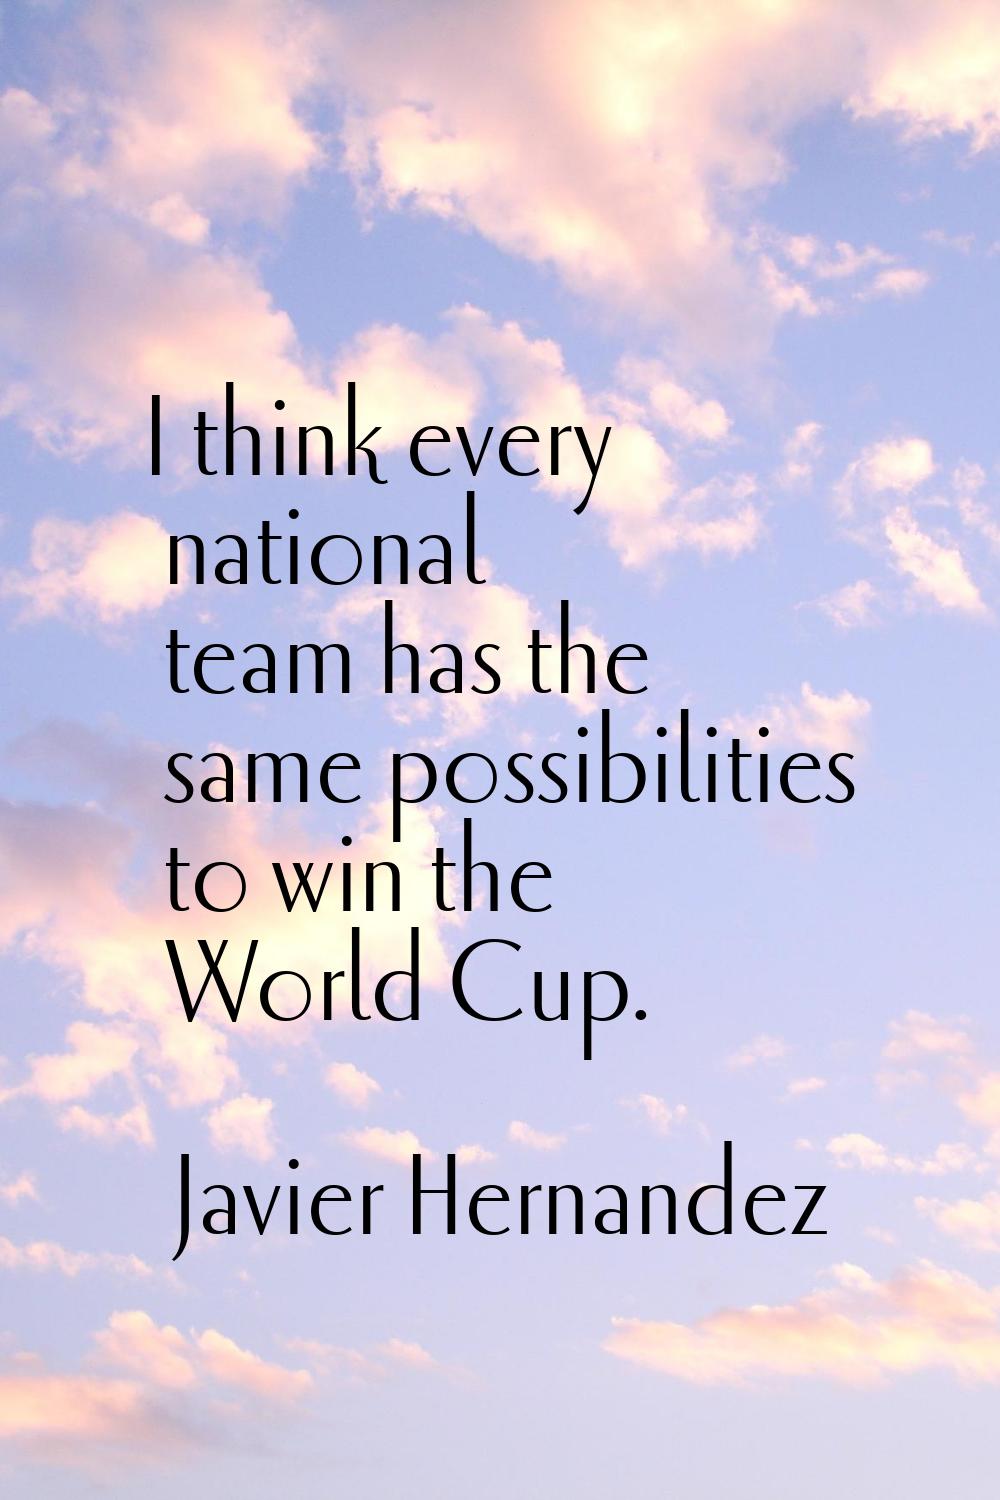 I think every national team has the same possibilities to win the World Cup.